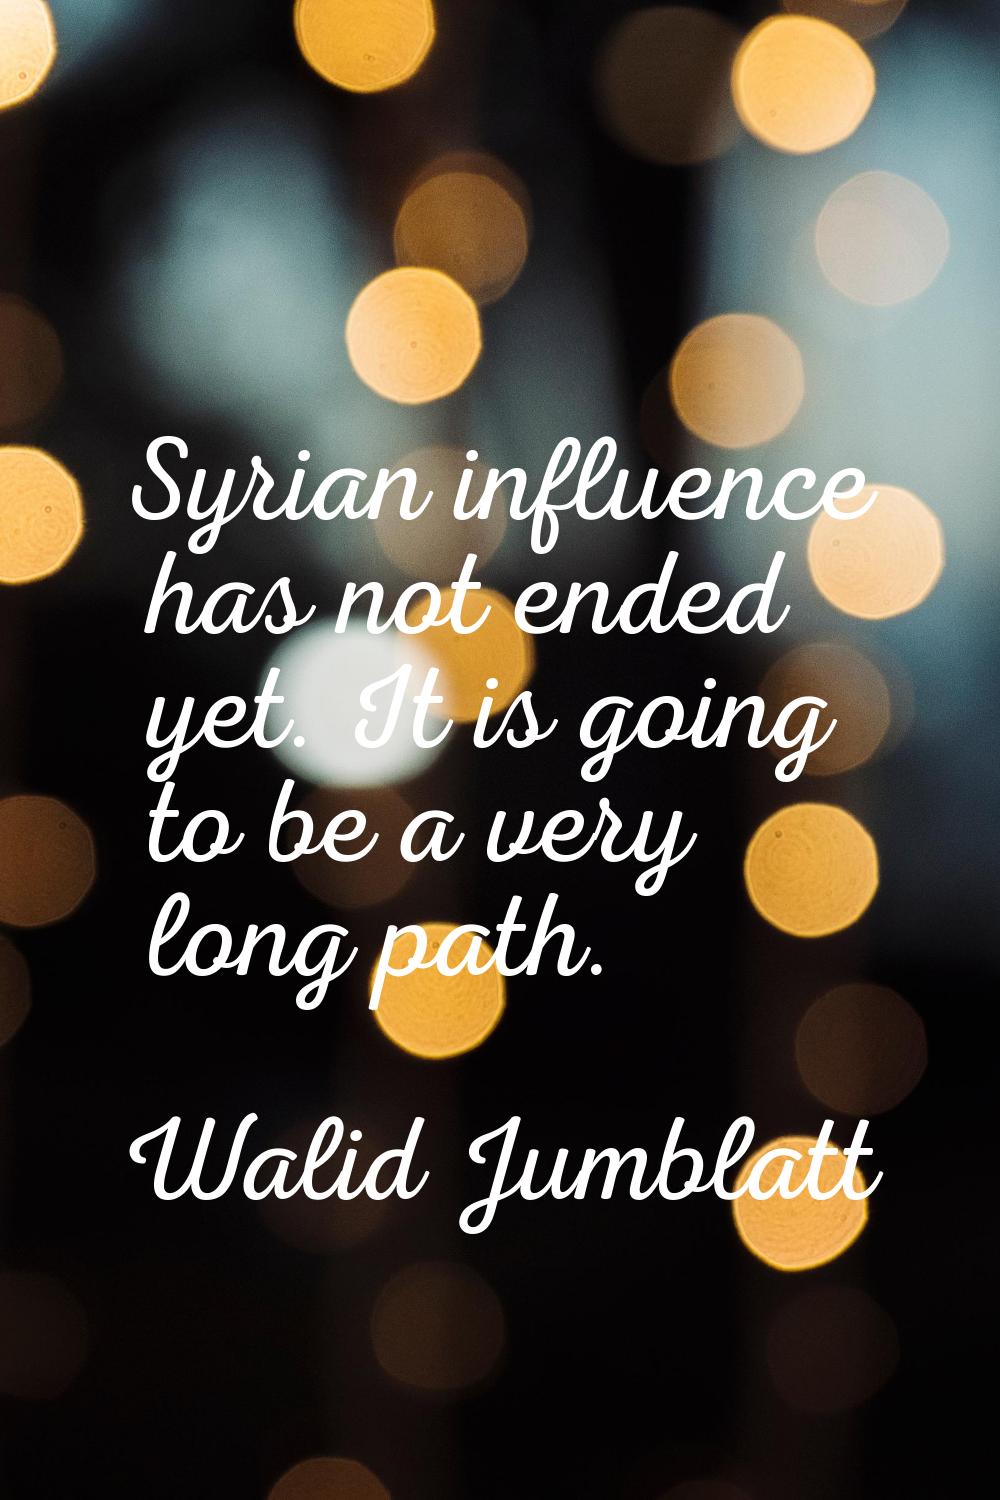 Syrian influence has not ended yet. It is going to be a very long path.